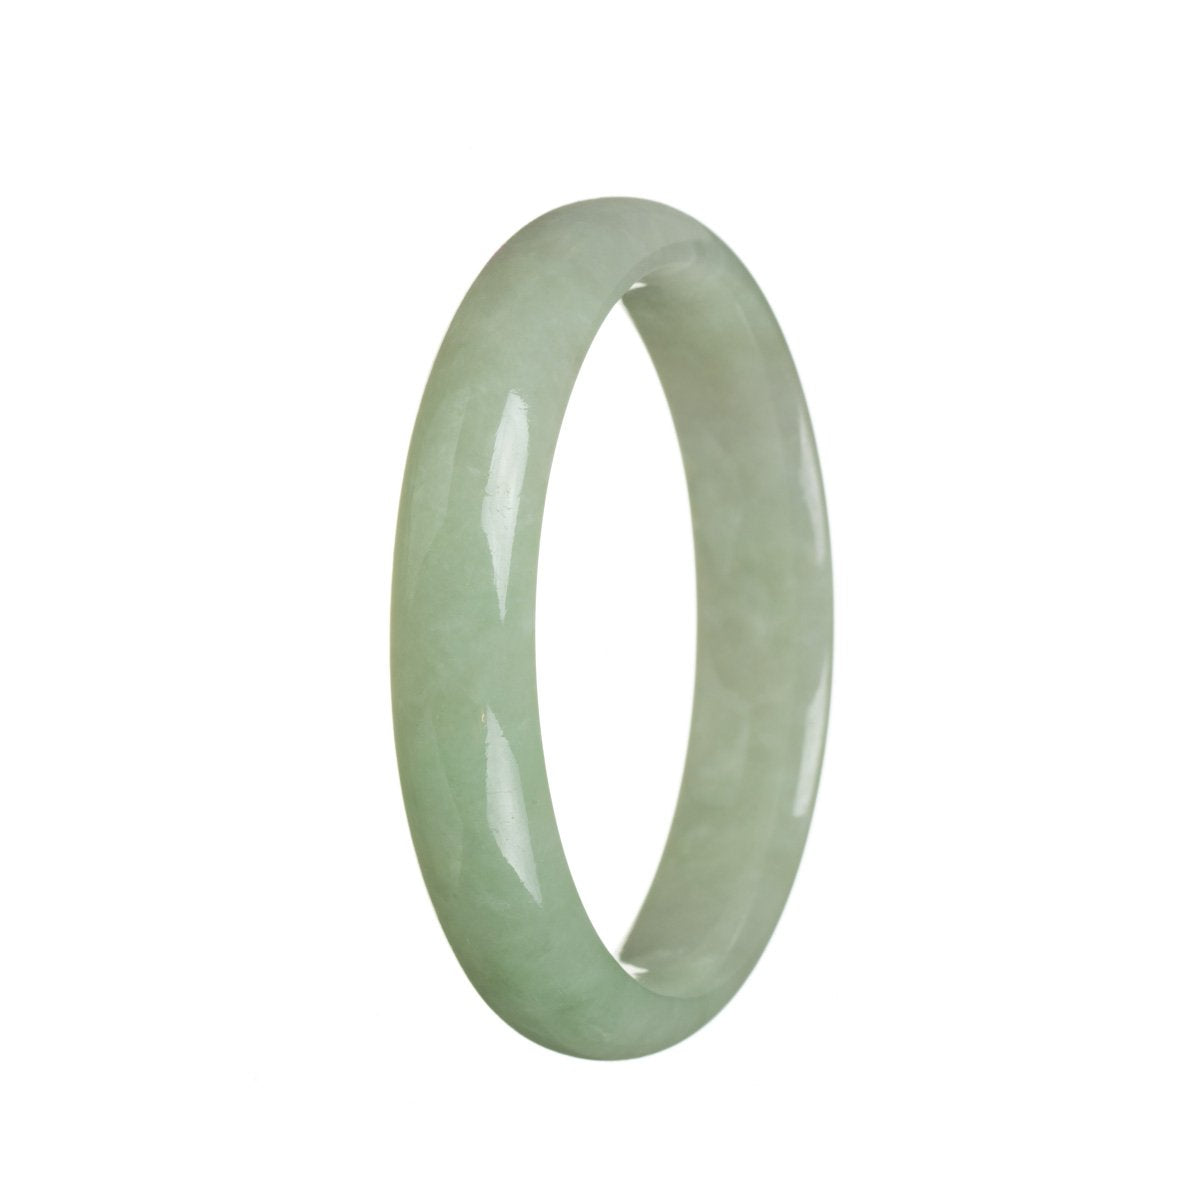 A half moon-shaped green jade bangle with a genuine natural finish, measuring 57mm in size.